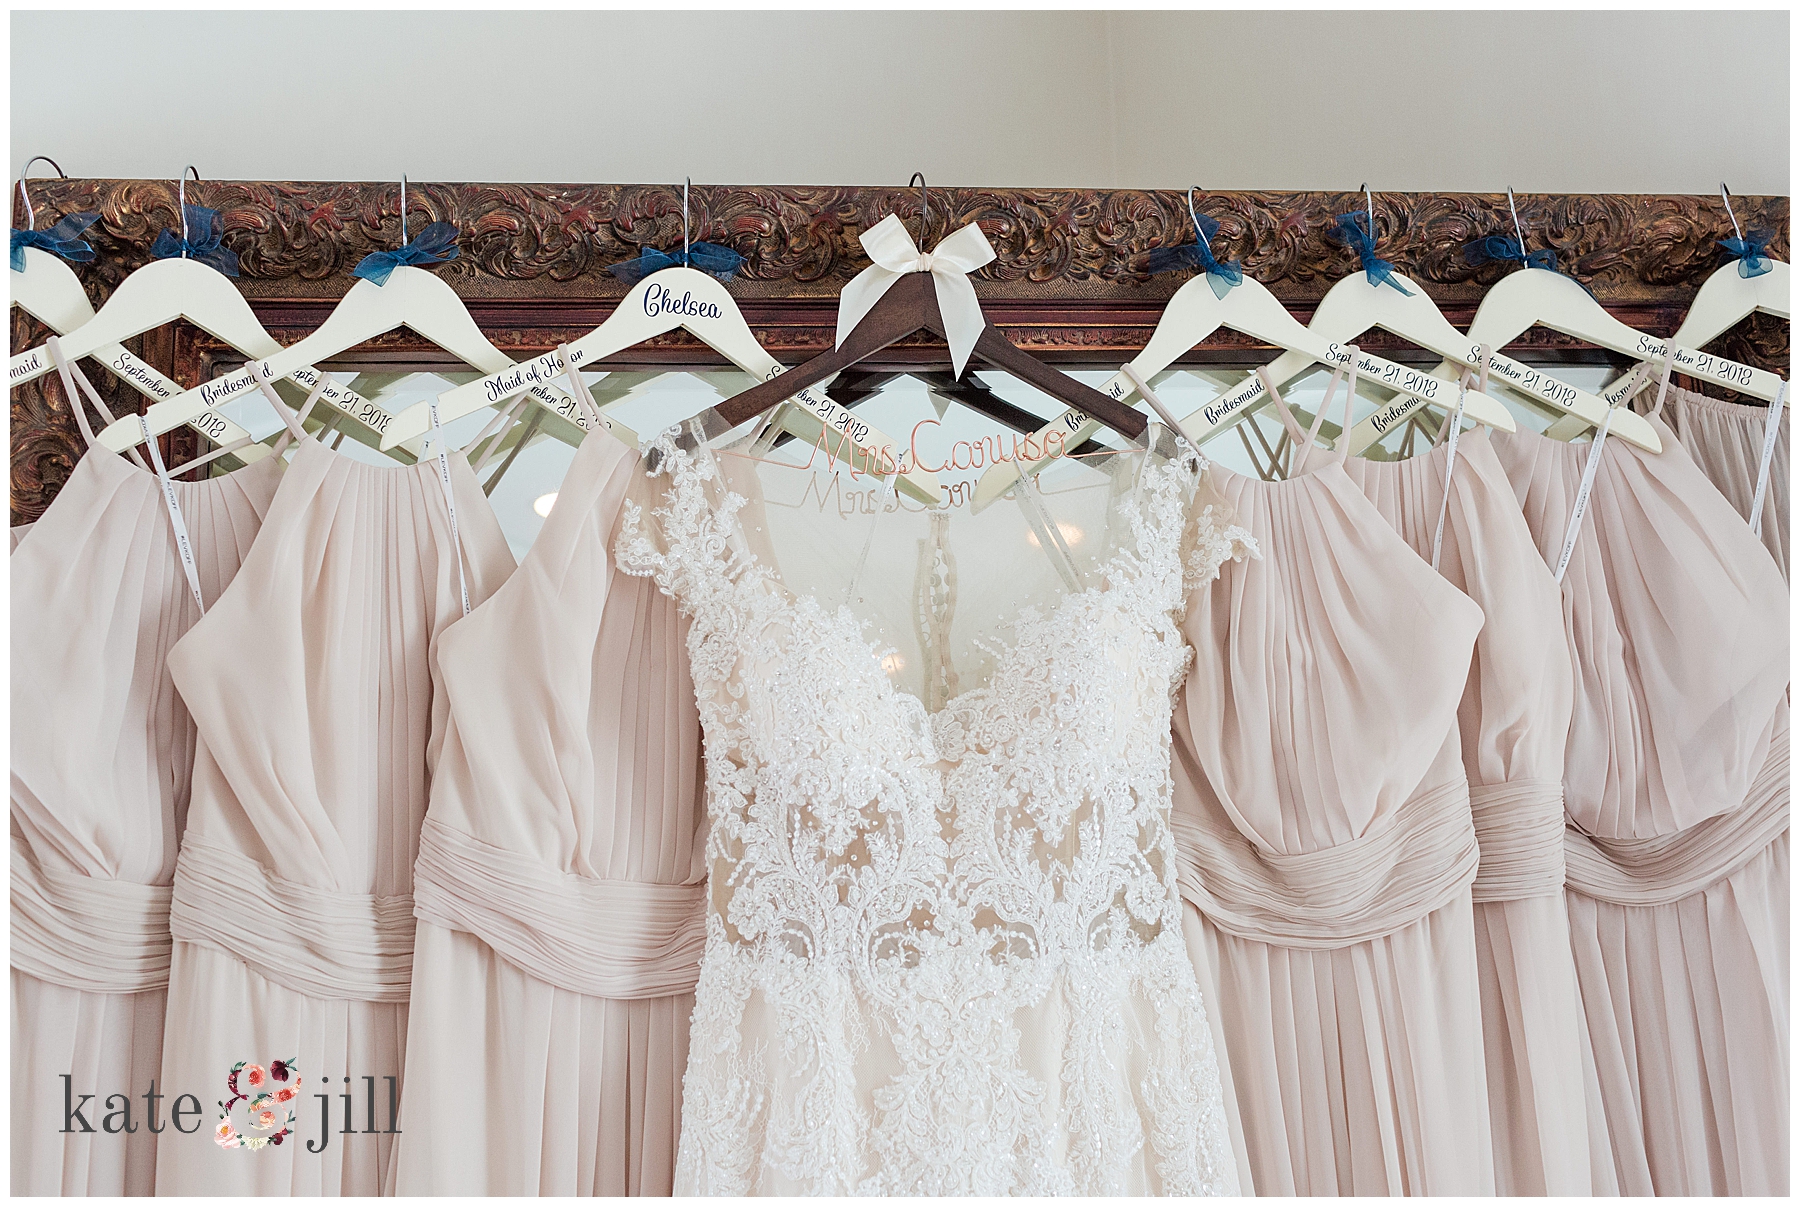 Wedding gown and bridesmaids dresses hanging